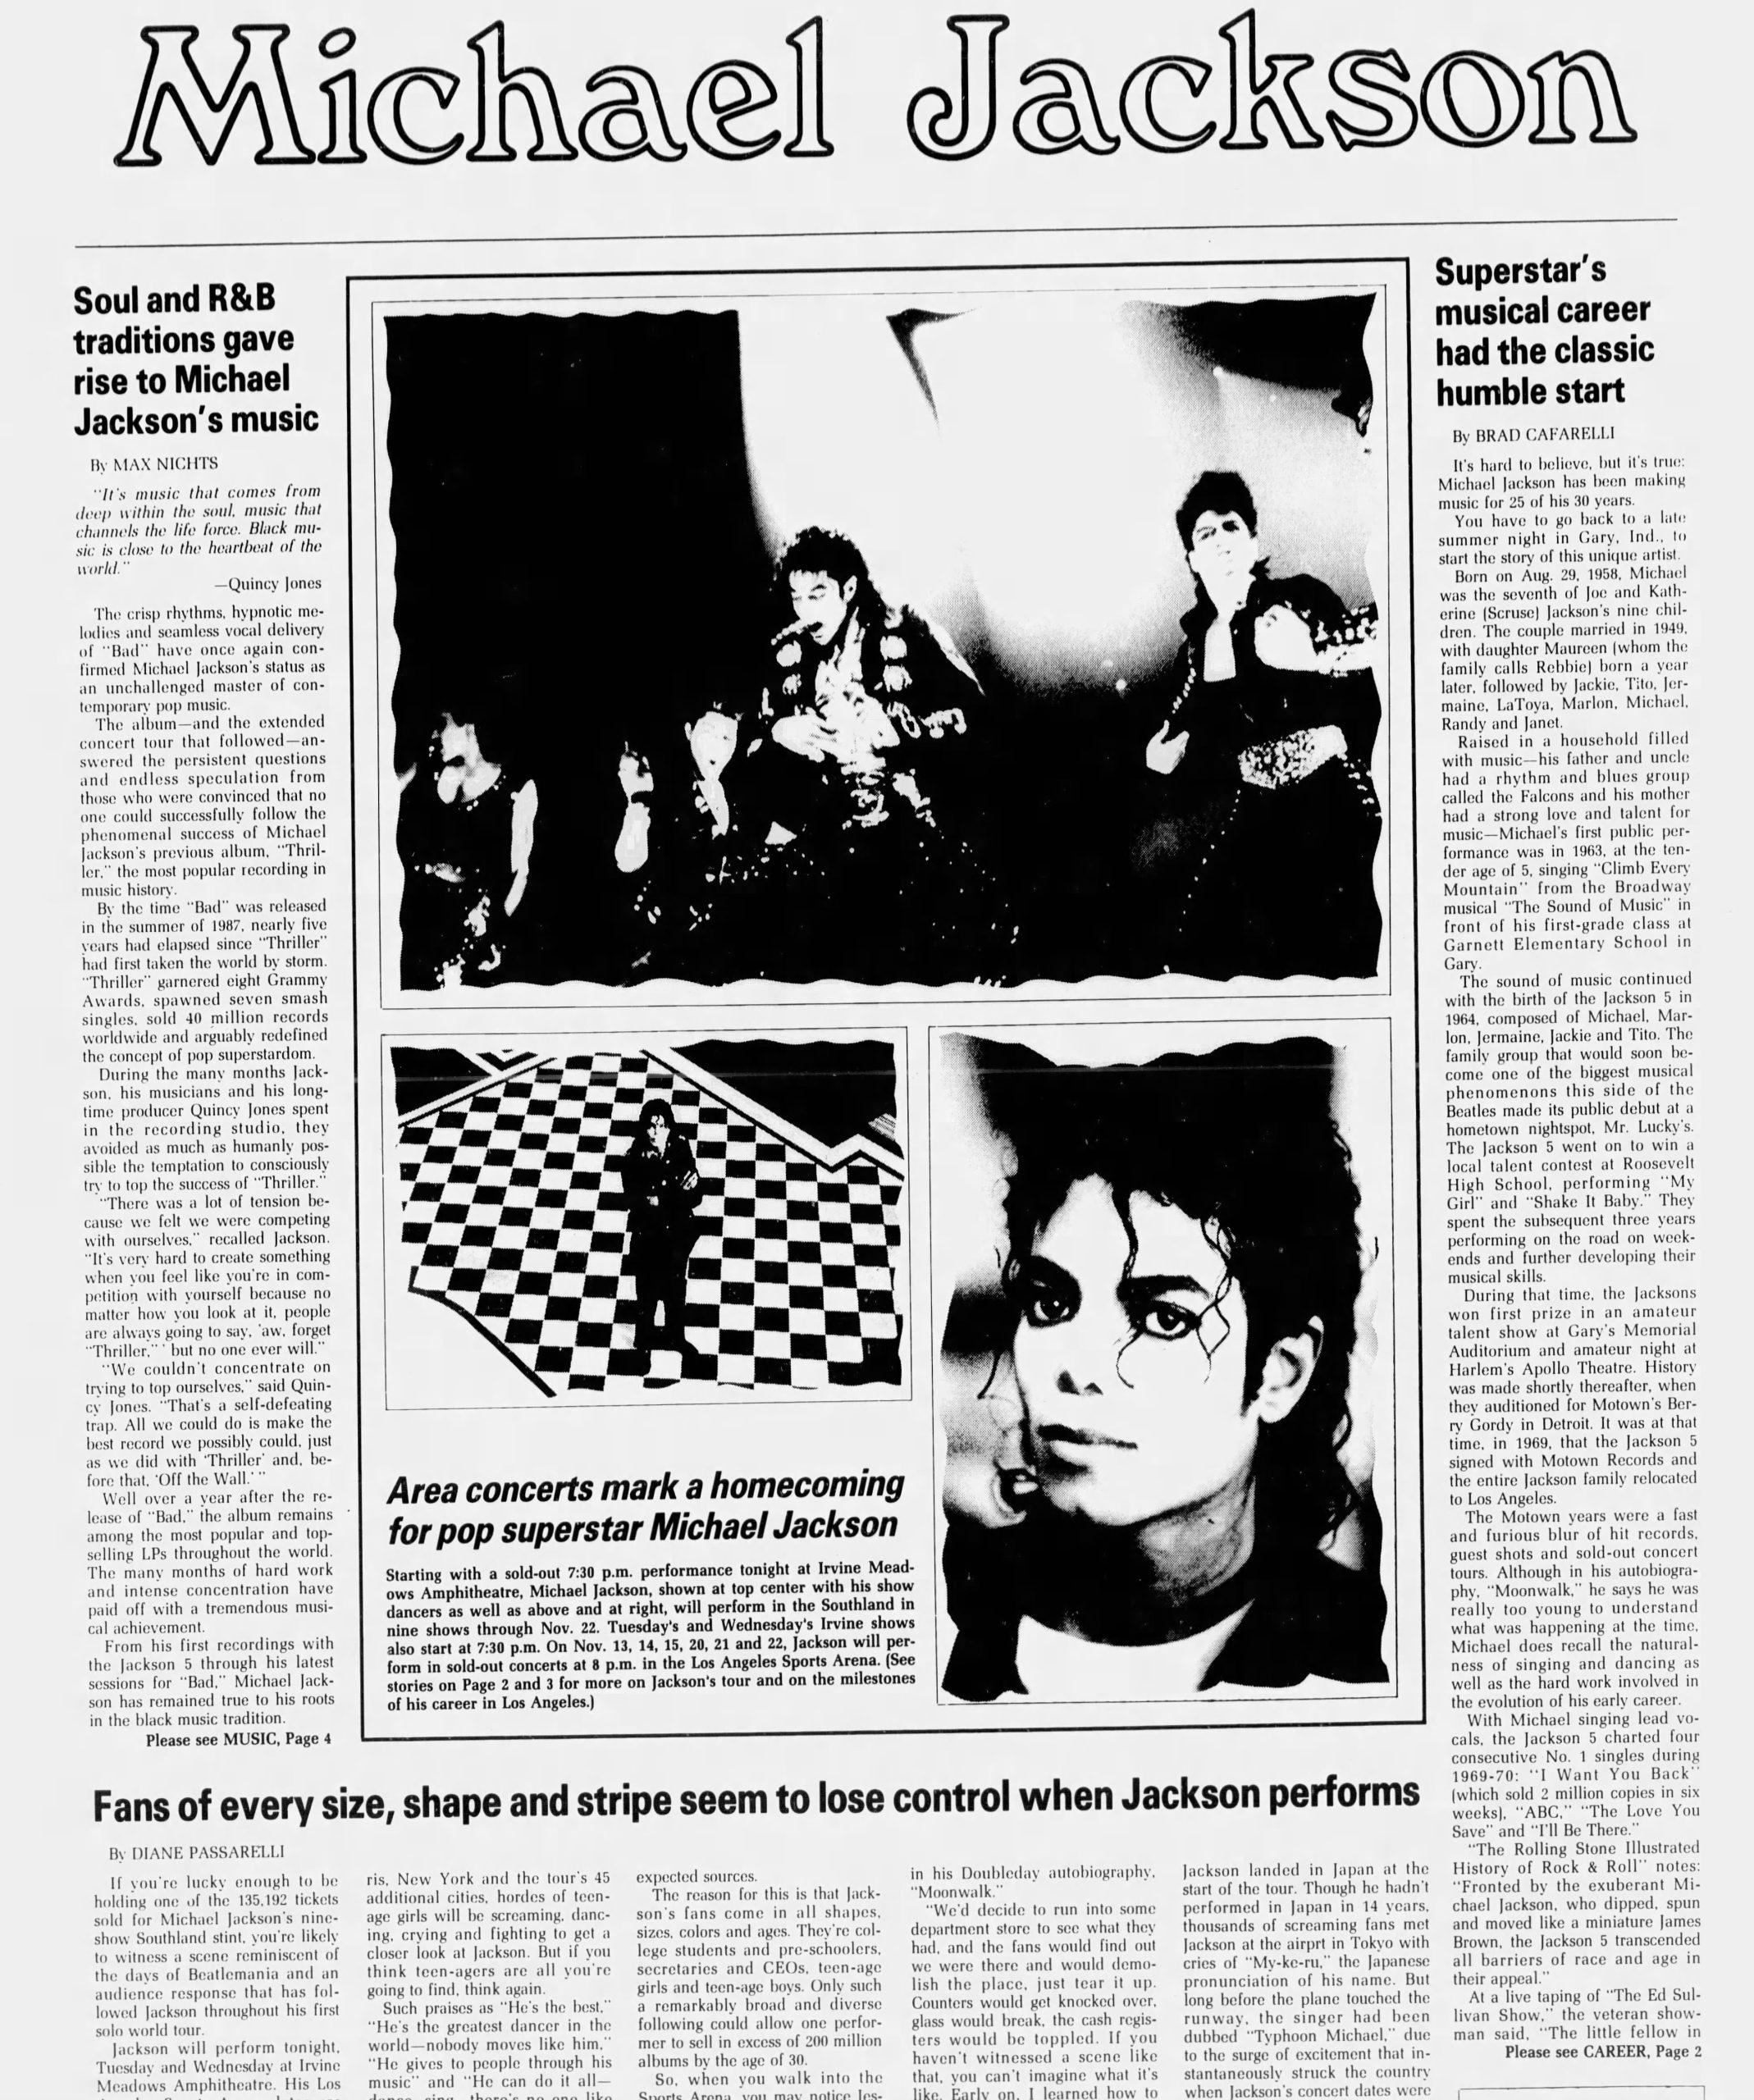 Michael Jackson Performed At Los Angeles Memorial Sports Arena This Day In 1988